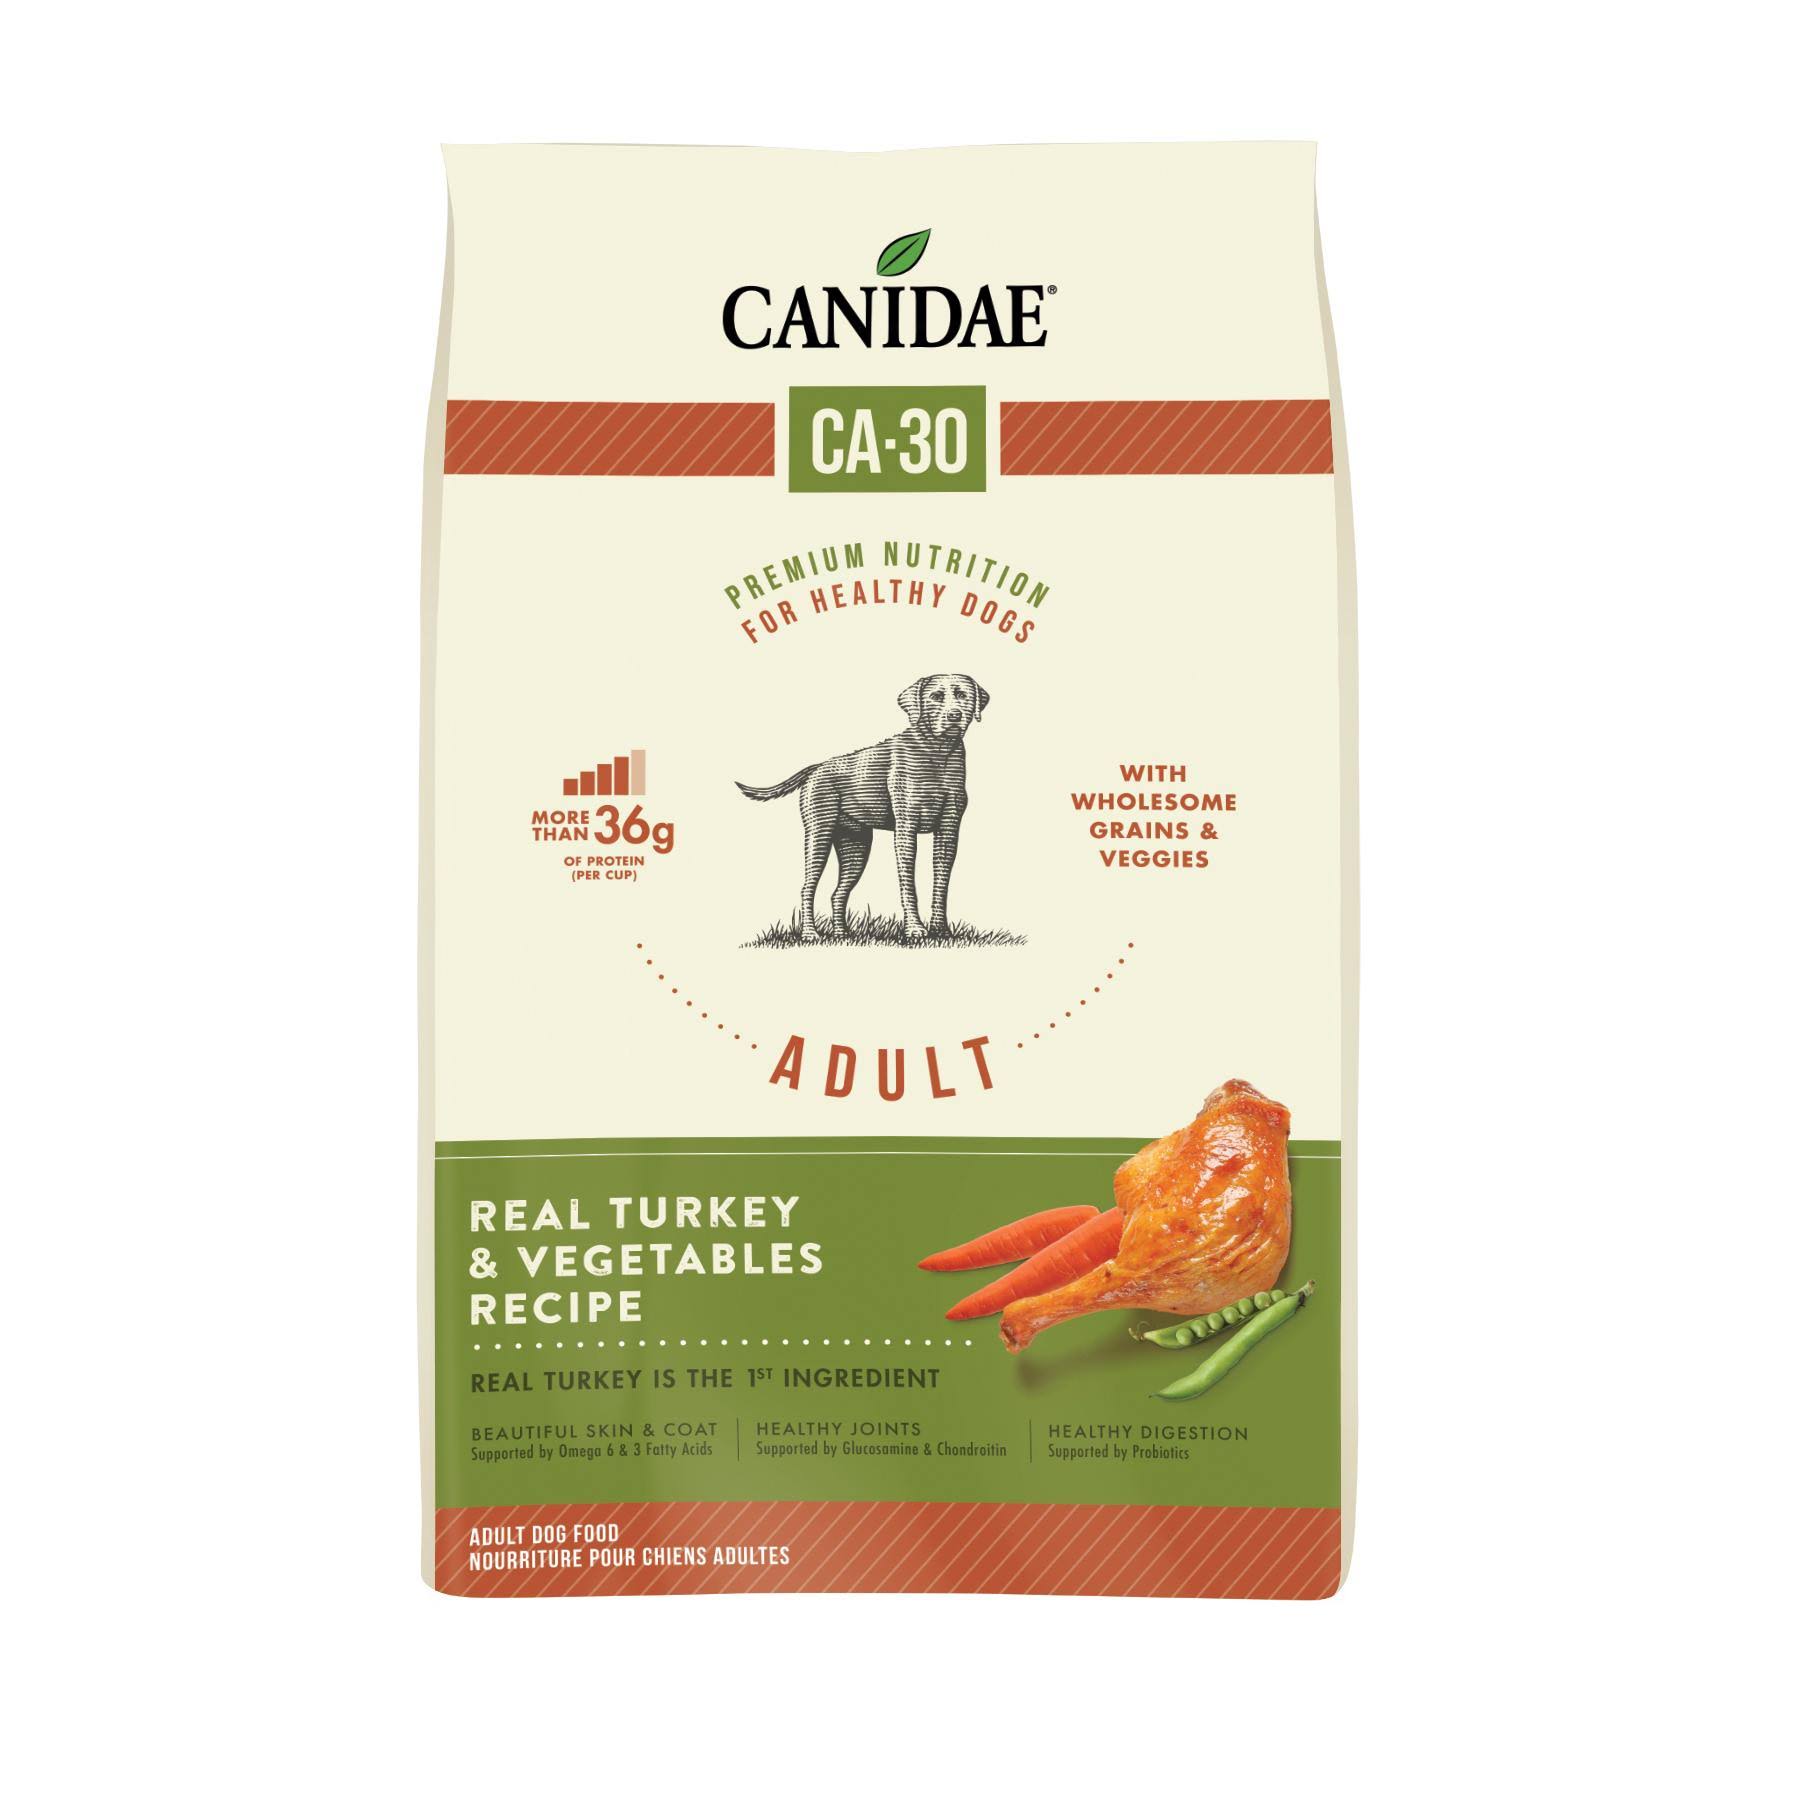 Canidae Snap Biscuits Dog Treats - Original, 4lb